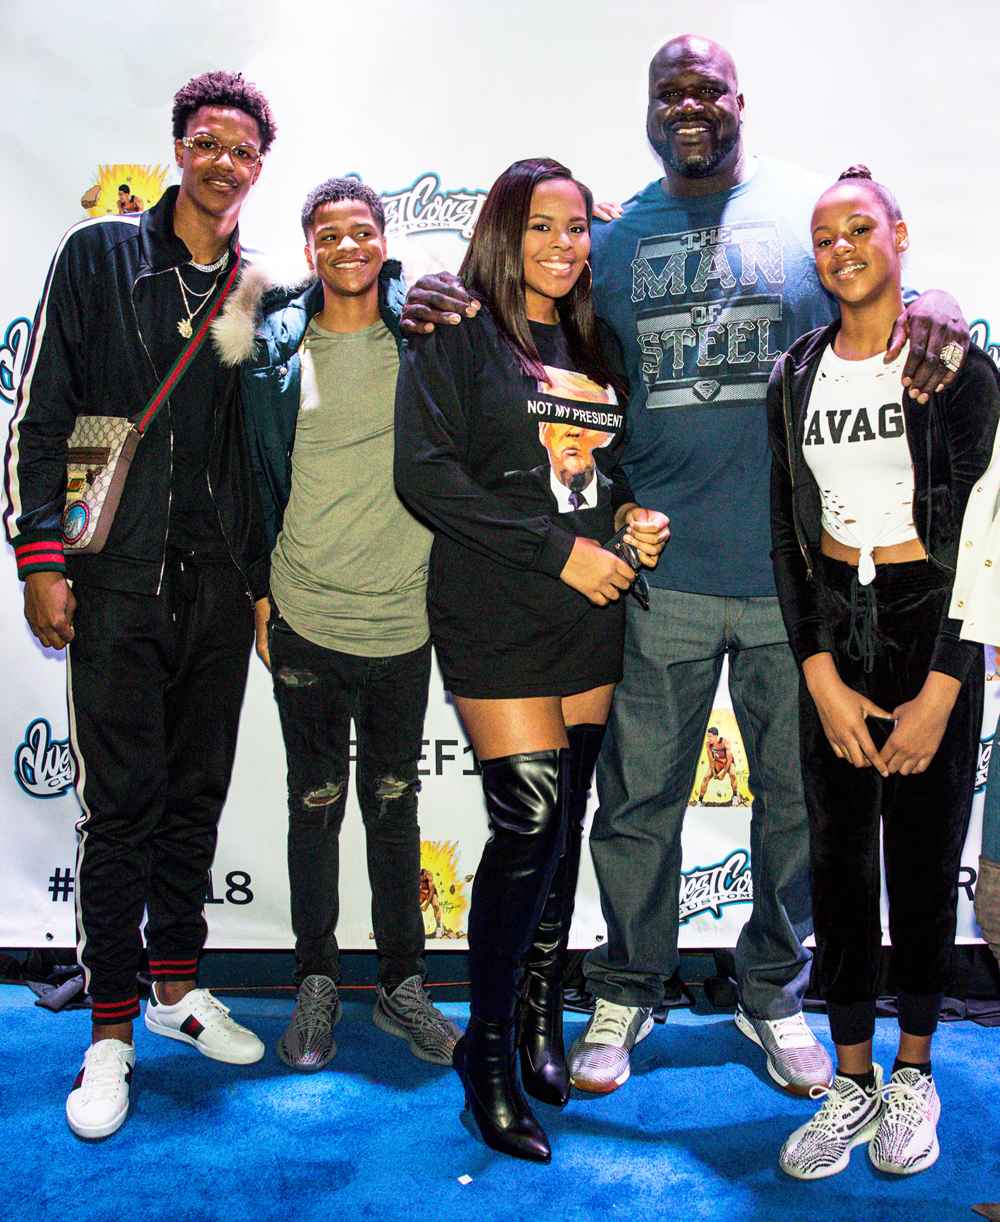 Shaquille O'Neal with four of his children at West Coast Customs on January 13, 2018 in Burbank, California.